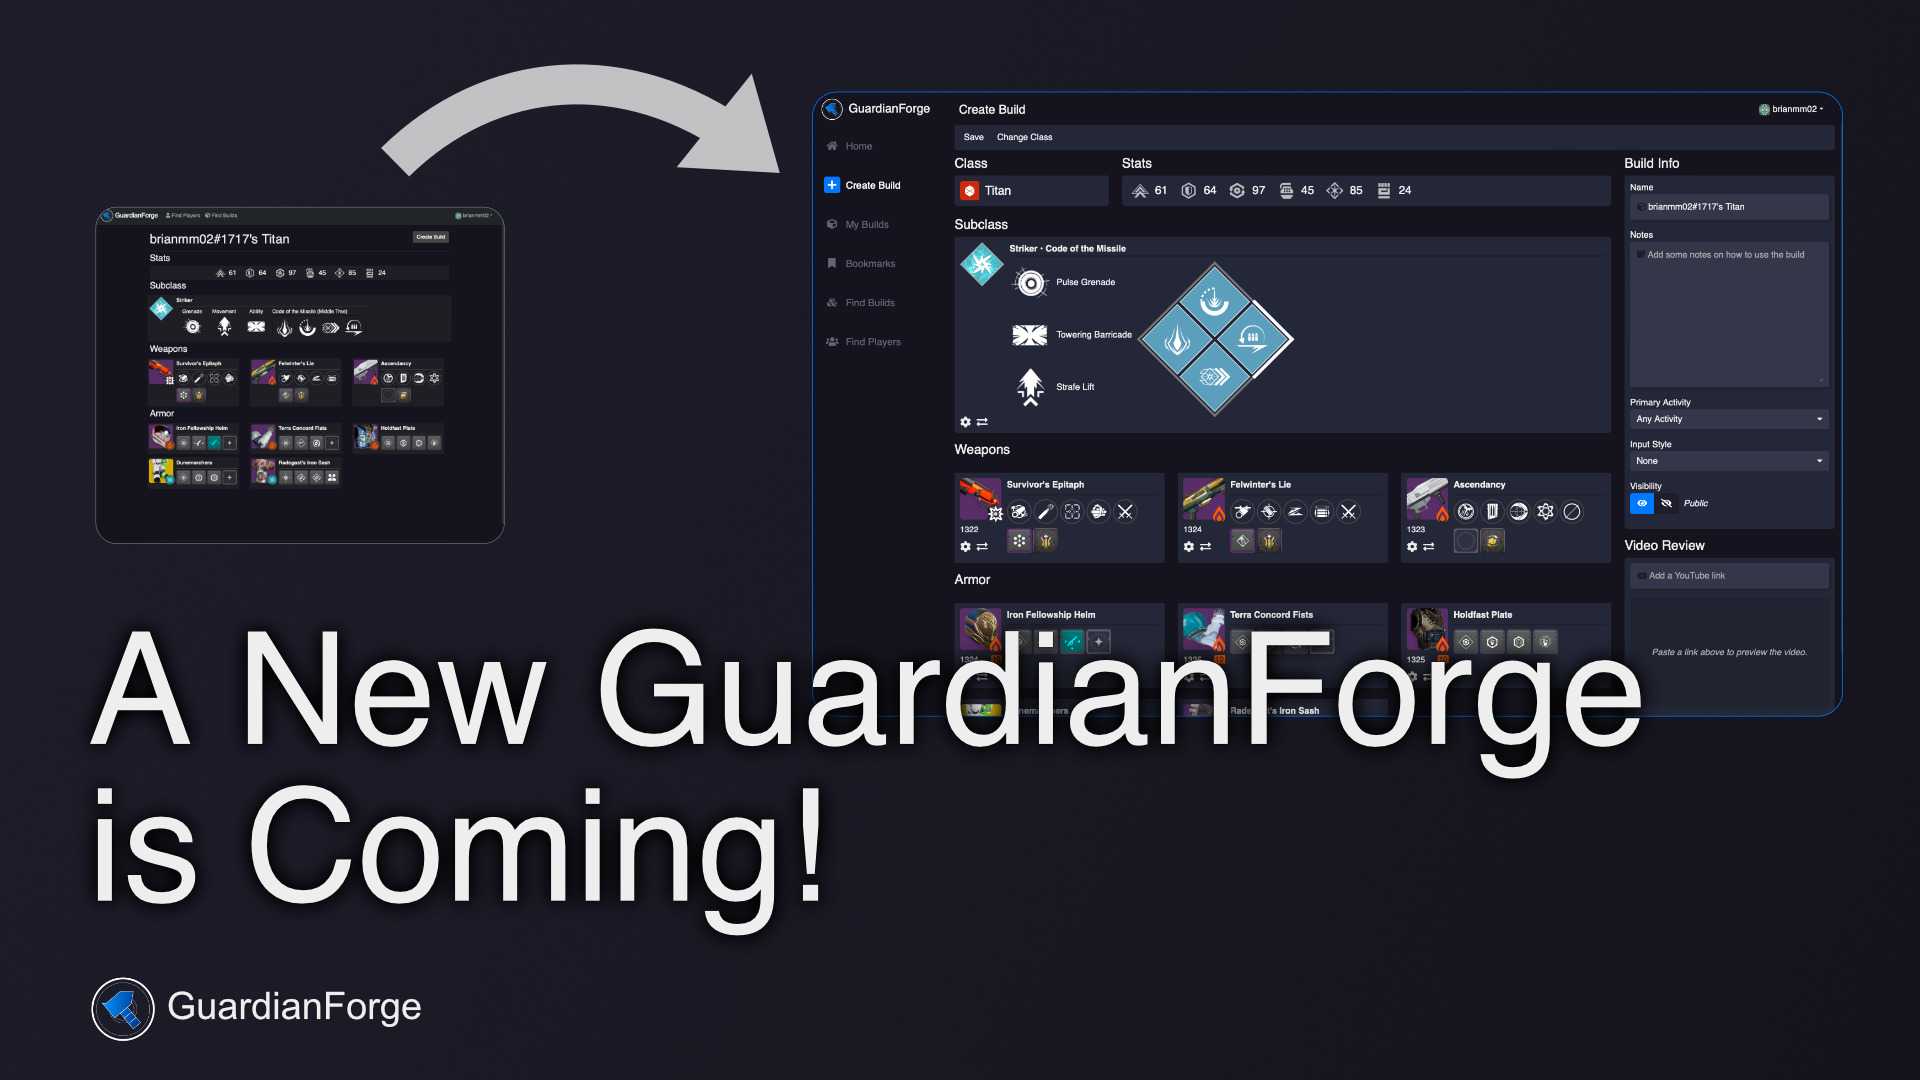 "A New GuardianForge is Coming!" Featured Image